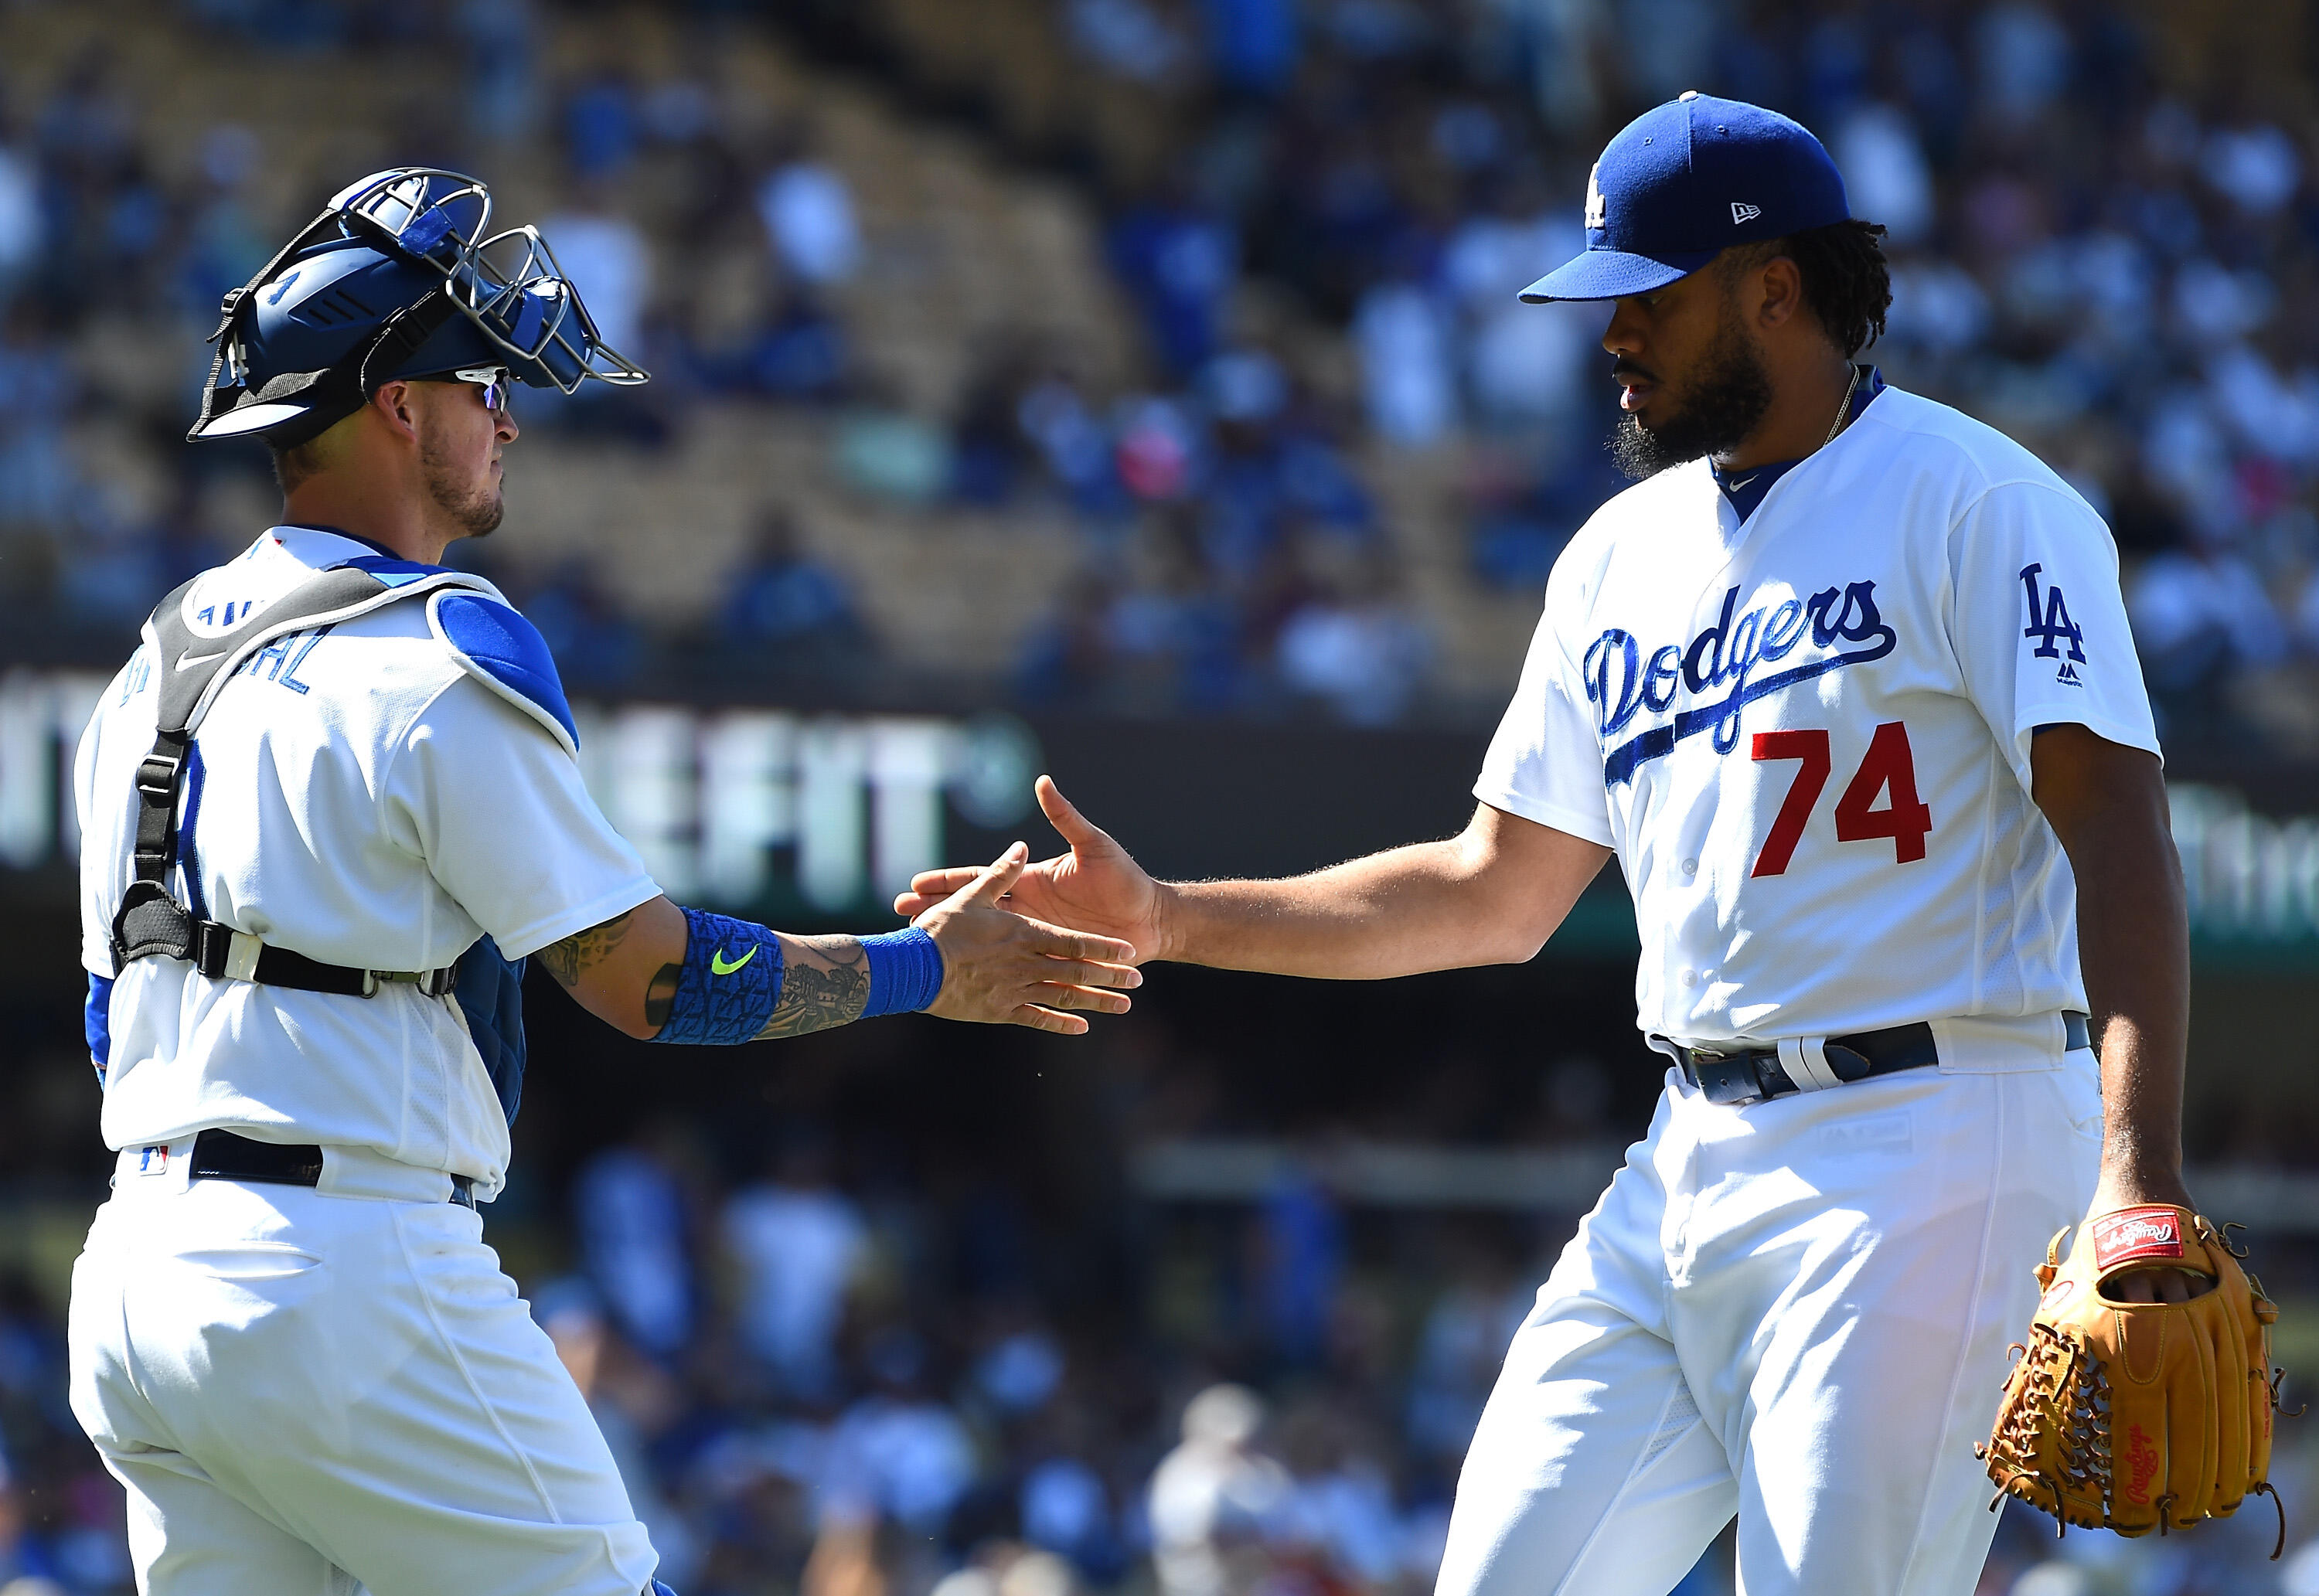 LOS ANGELES, CA - MAY 21: Kenley Jansen #74 of the Los Angeles Dodgers shakes hands with Yasmani Grandal #9 of the Los Angeles Dodgers after a save in the ninth inning against the Miami Marlins at Dodger Stadium on May 21, 2017 in Los Angeles, California.